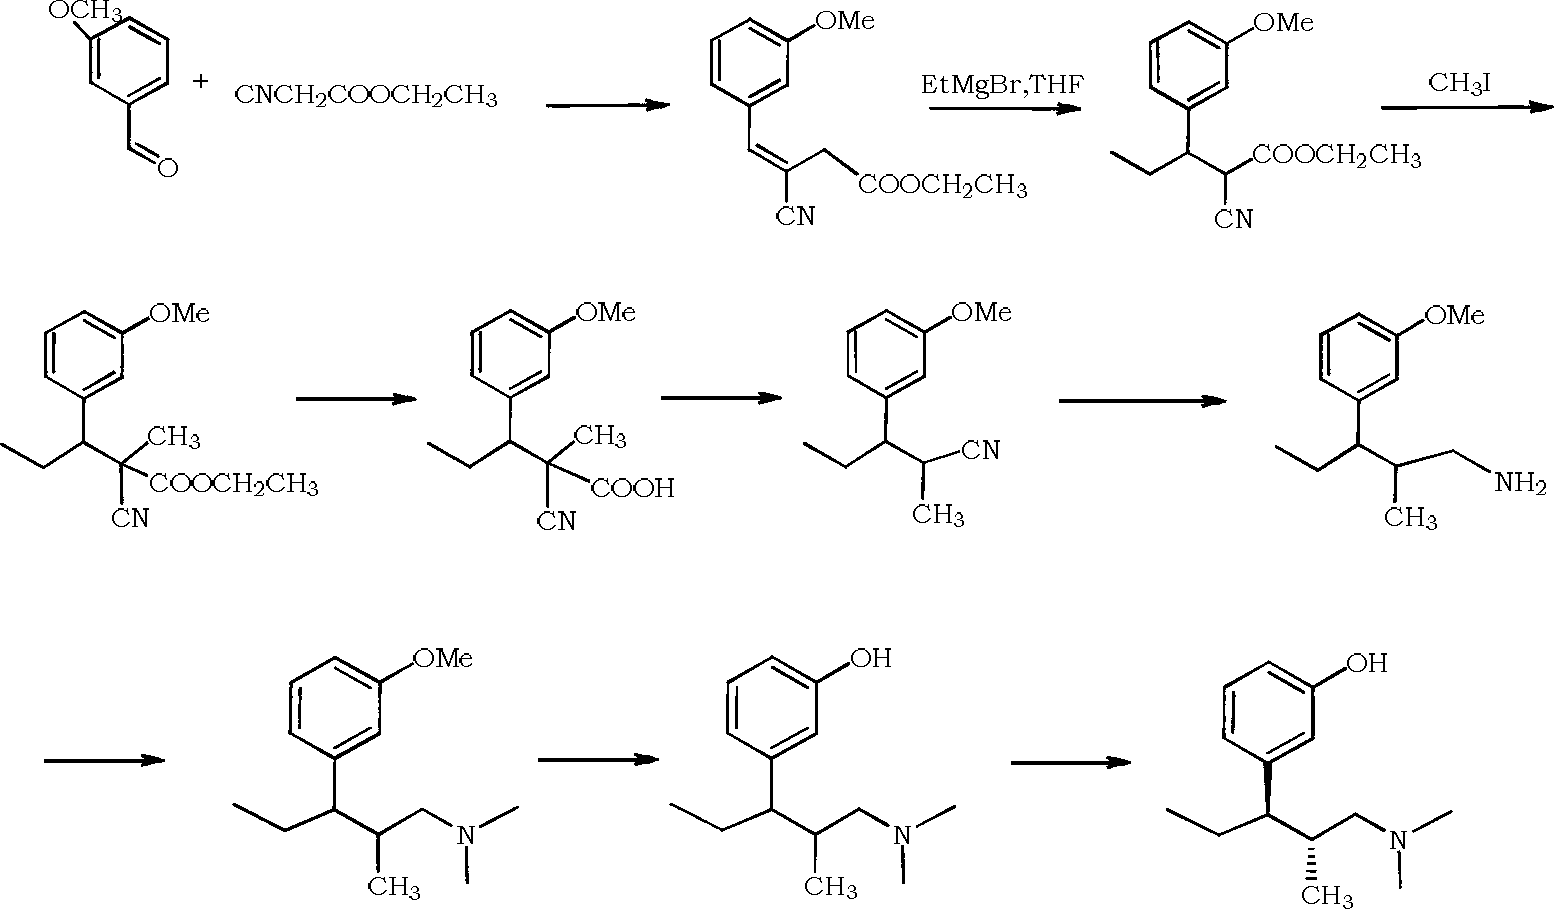 Synthesis method of tapentadol